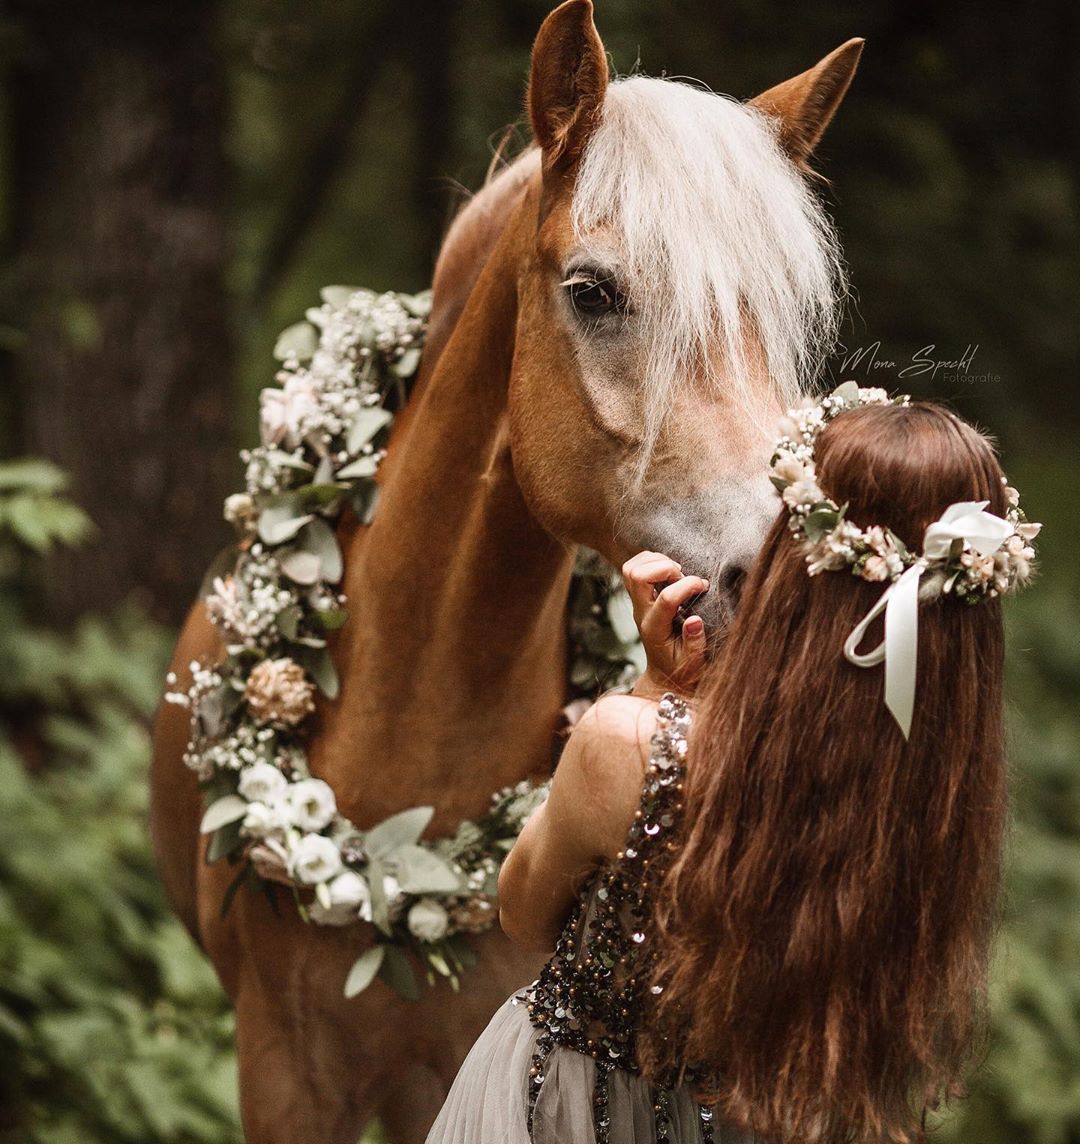 A Horse wearing a flower and leaves garland while standing in front of lady kissing her nose